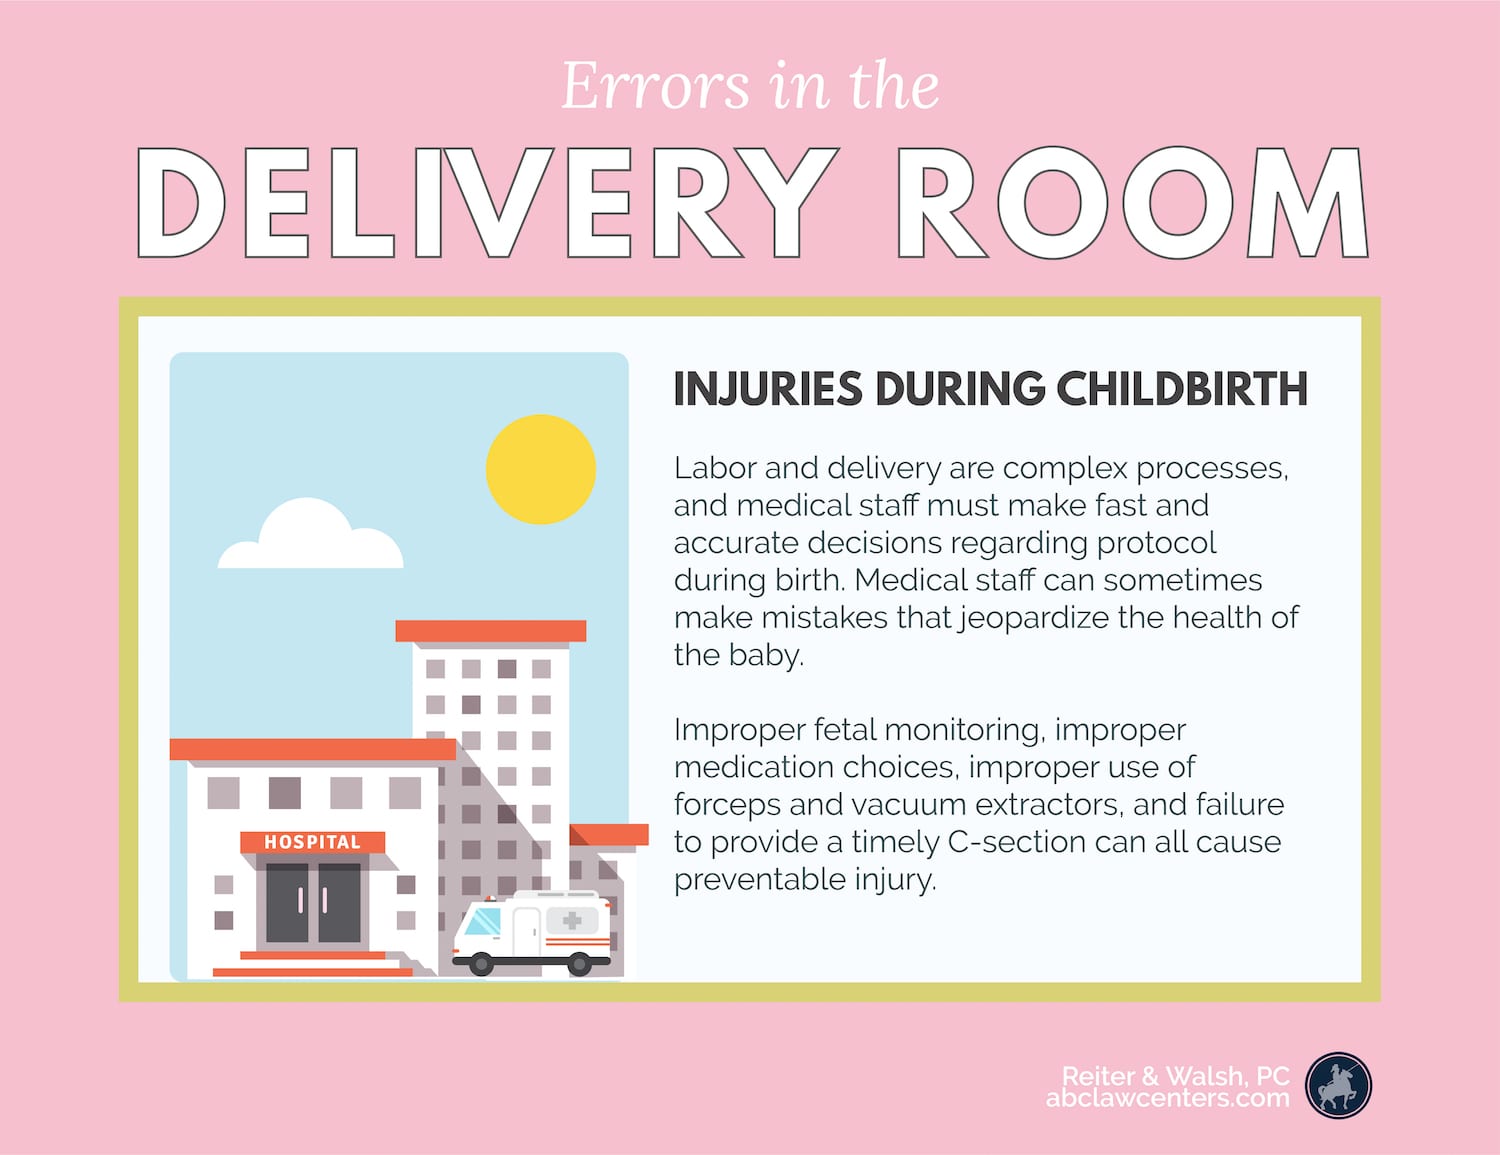 Delivery Room Errors - Childbirth Injuries